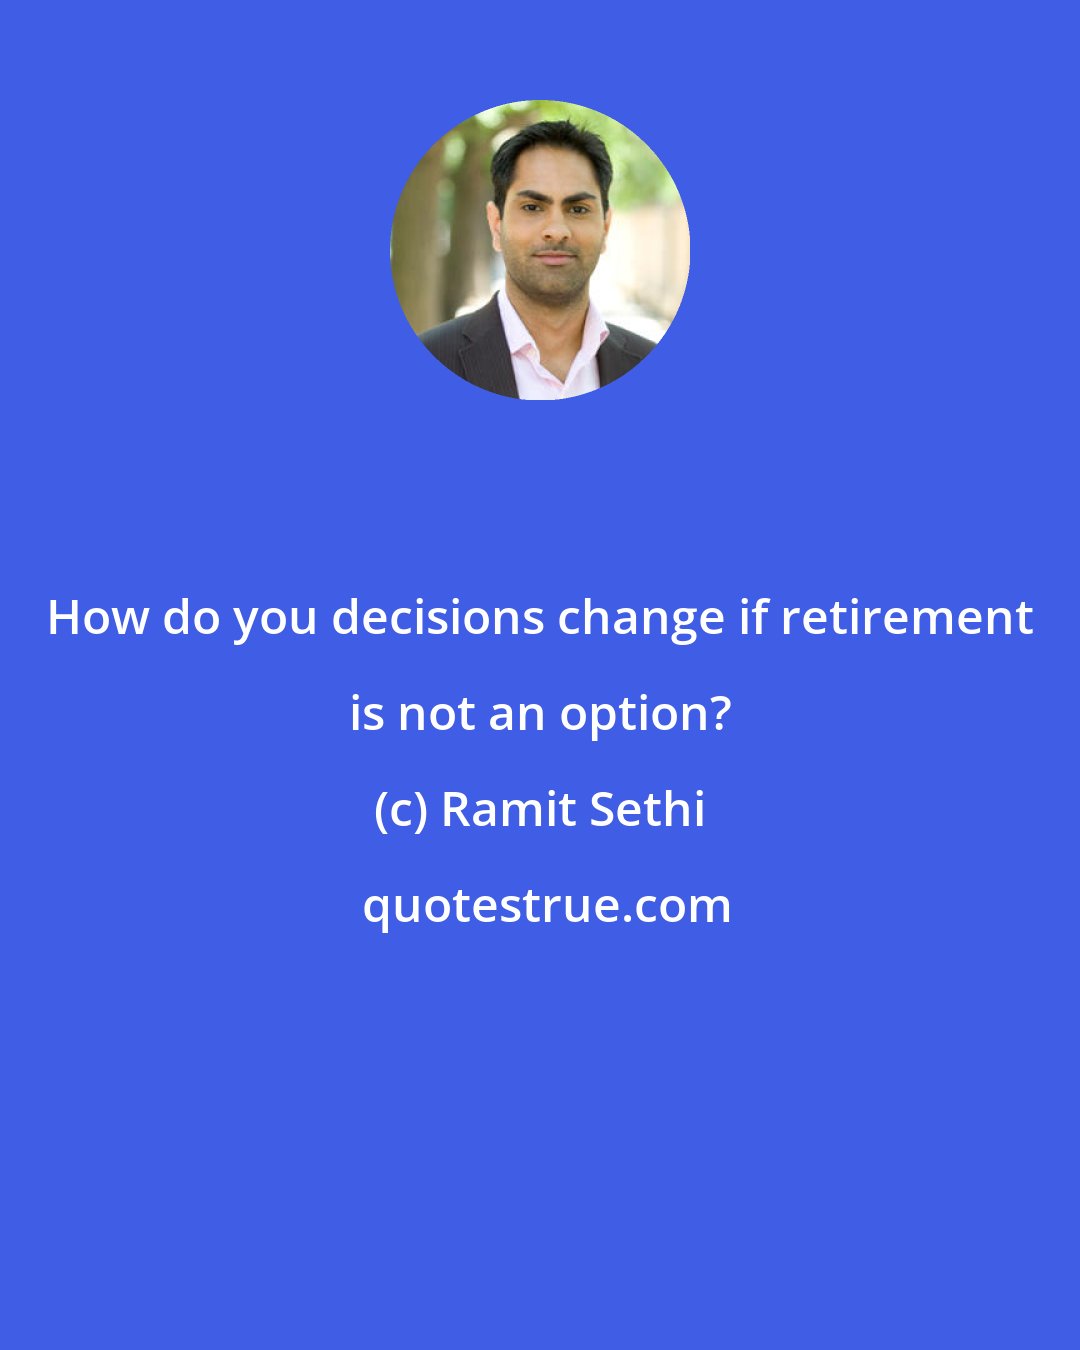 Ramit Sethi: How do you decisions change if retirement is not an option?